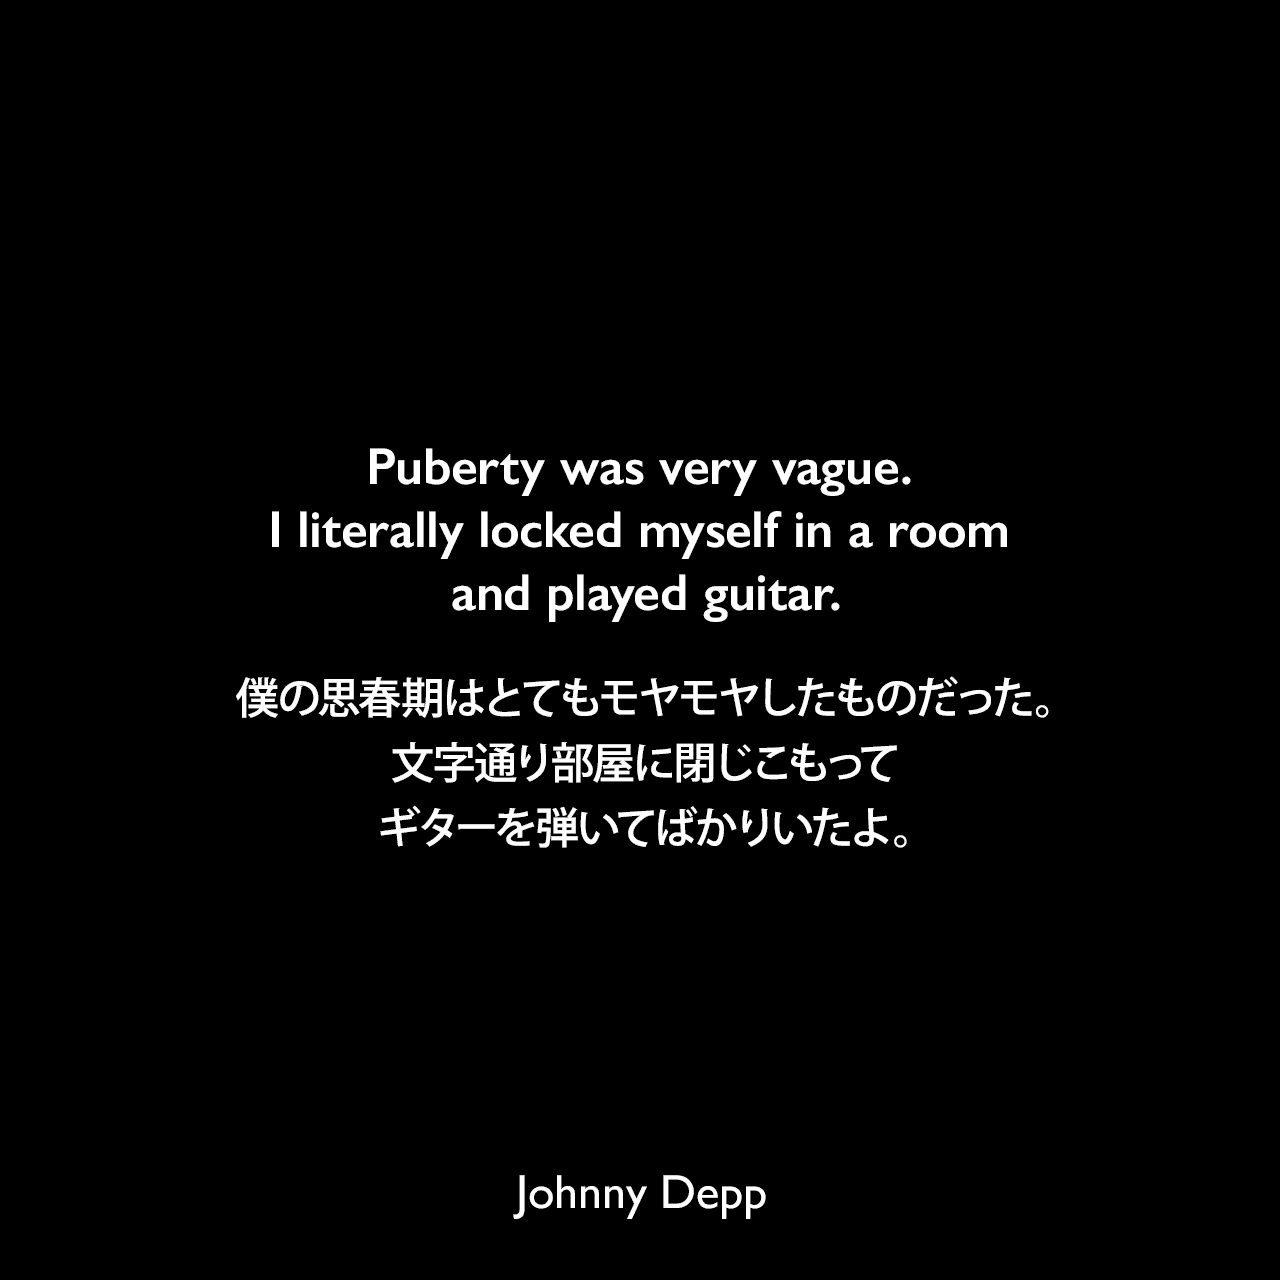 Puberty was very vague. I literally locked myself in a room and played guitar.僕の思春期はとてもモヤモヤしたものだった。文字通り部屋に閉じこもってギターを弾いてばかりいたよ。Johnny Depp